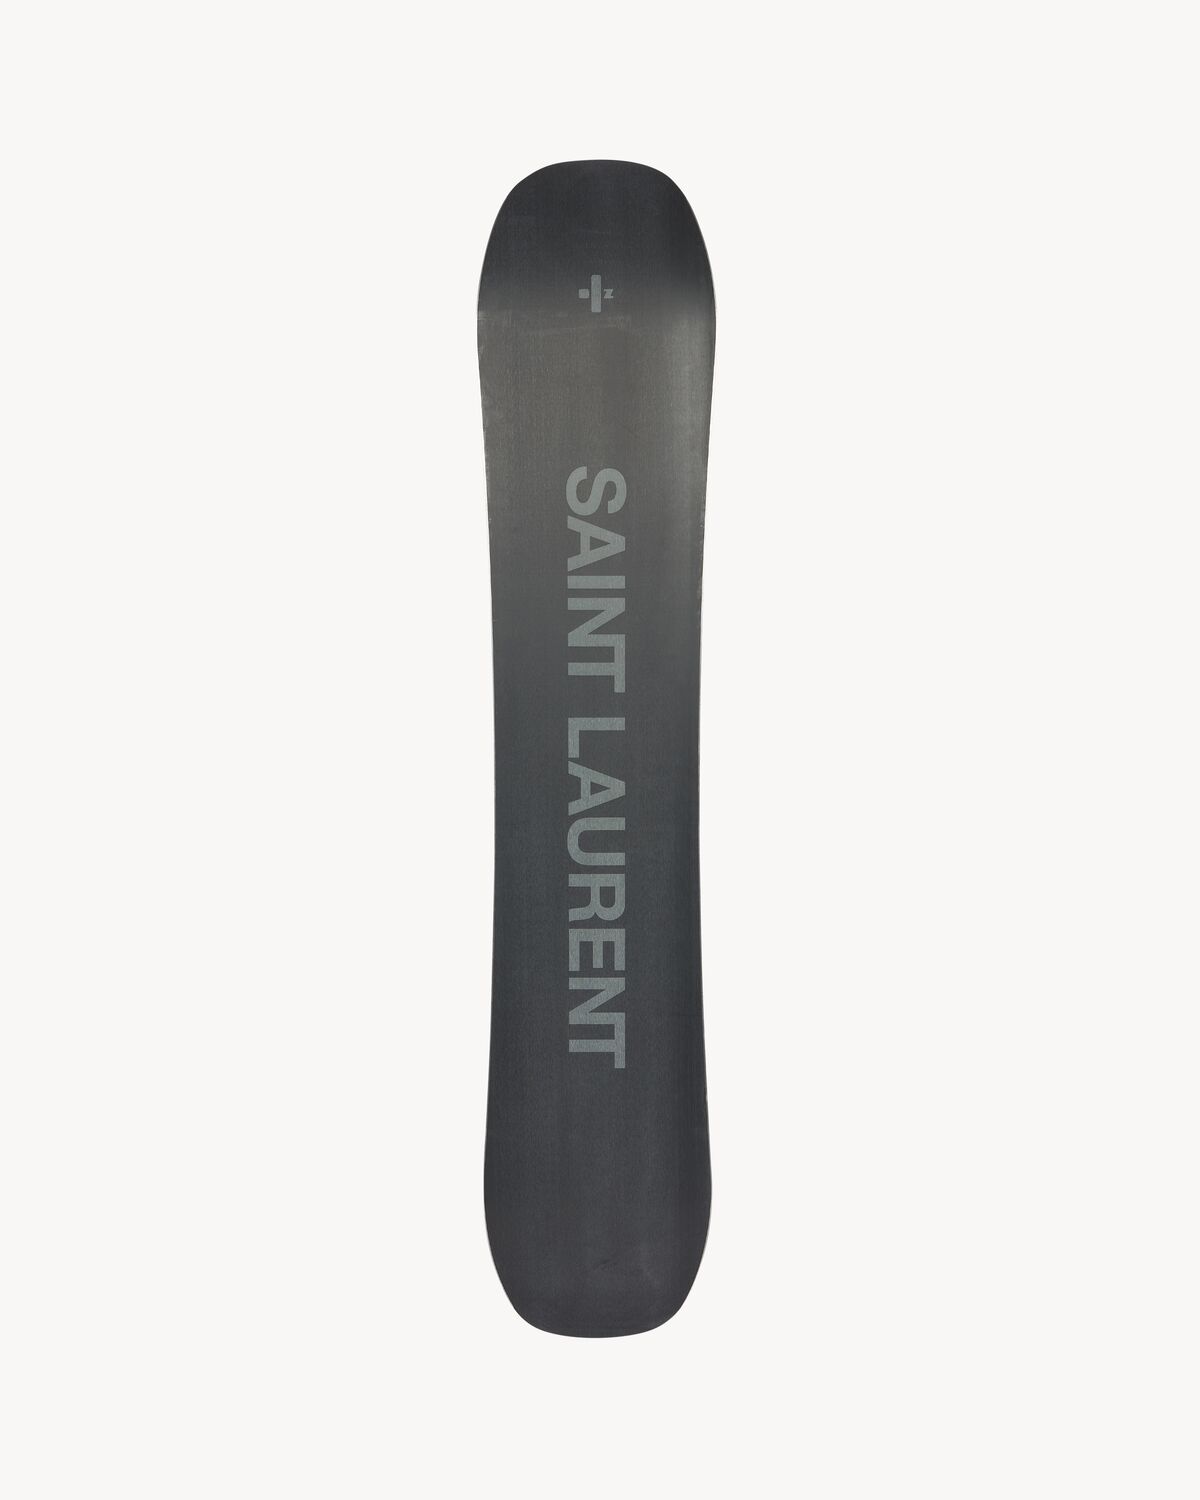 Zai Saint Laurent snowboard in wood and rubber